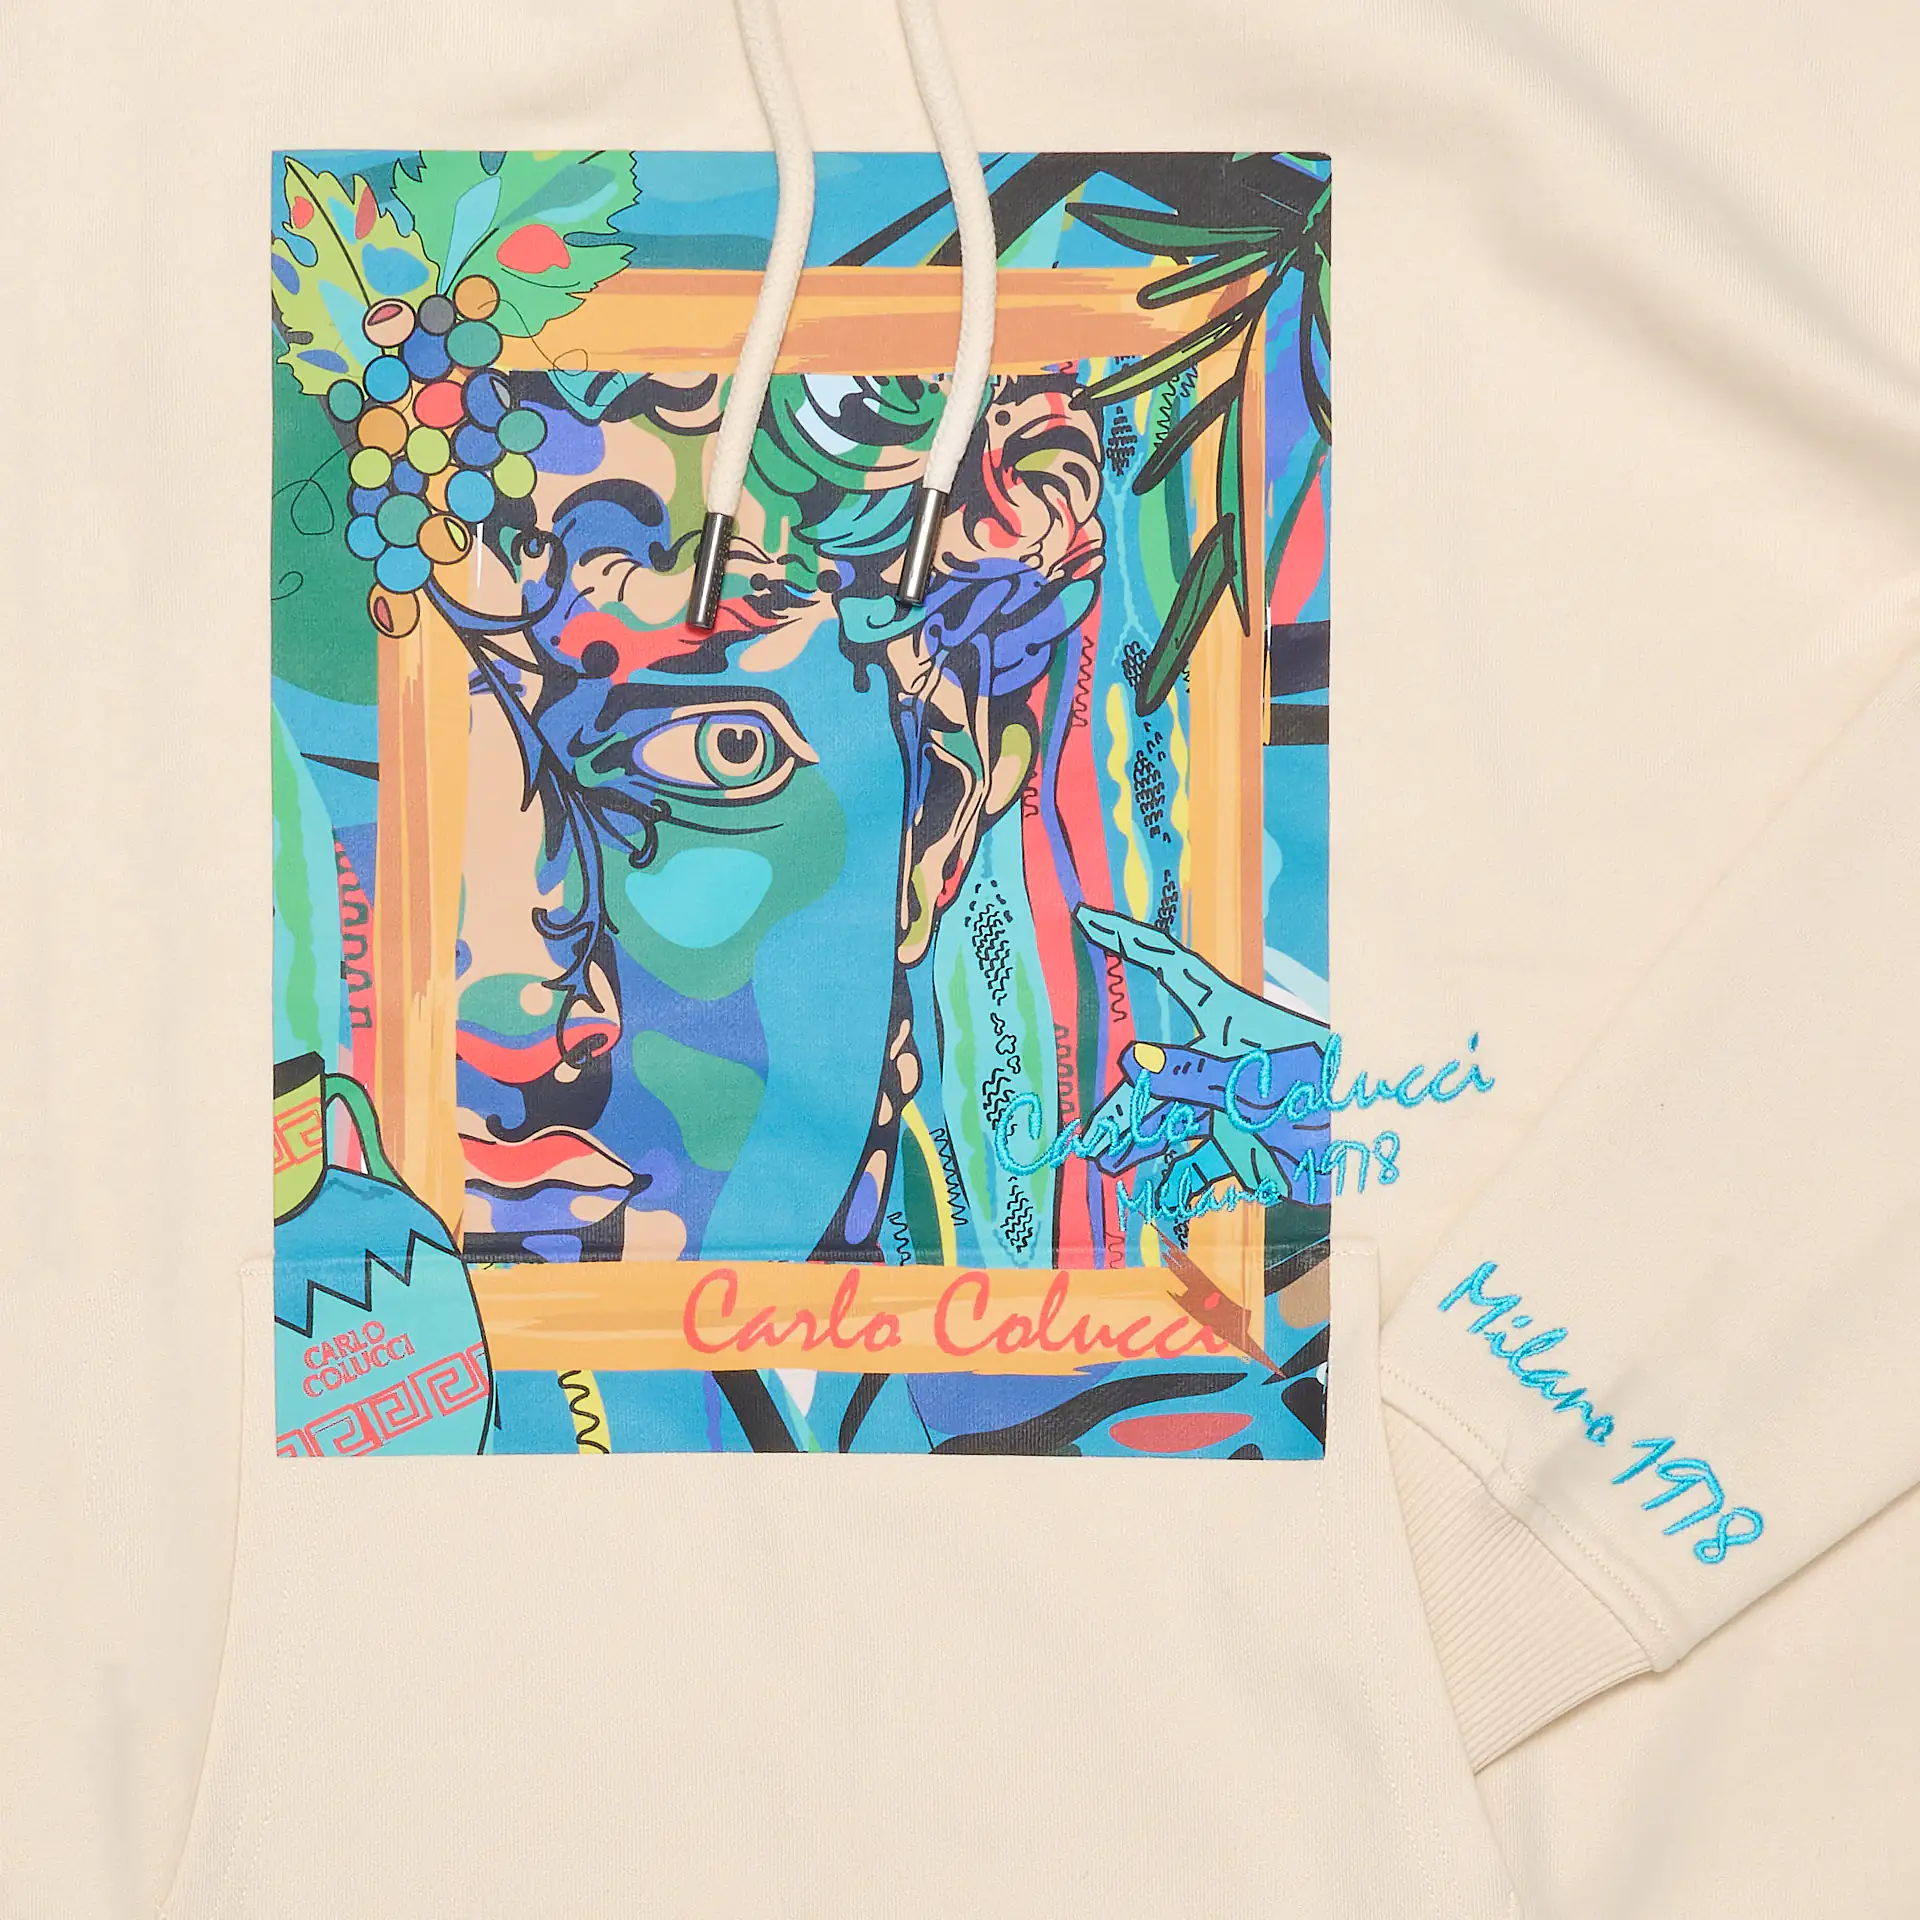 Carlo Colucci Gallery Art Story Oversize Hoodie Off White